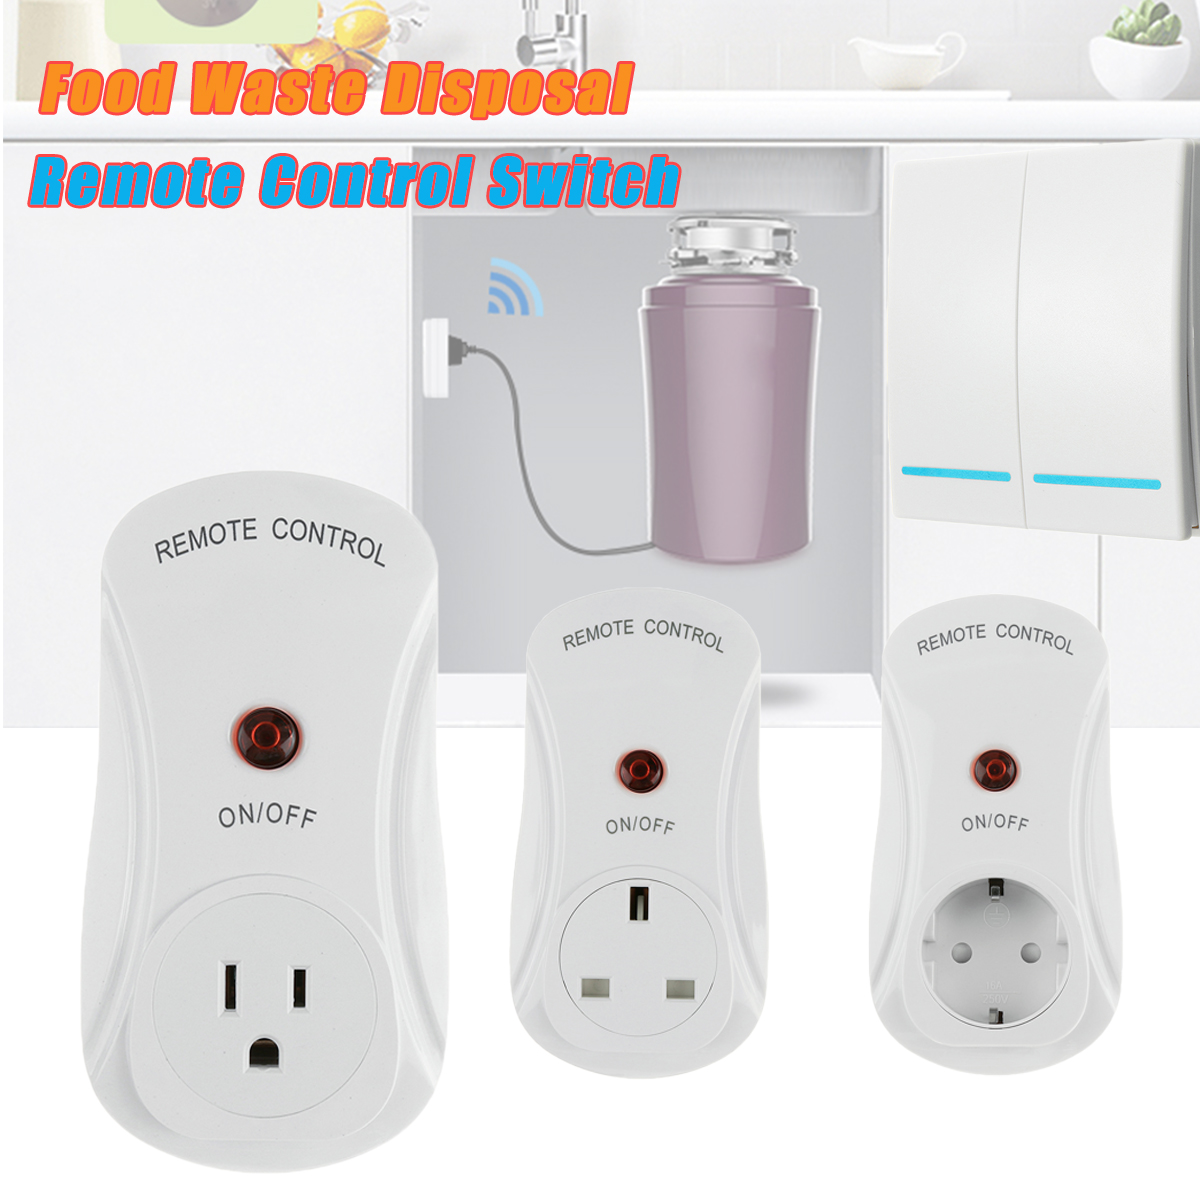 Wireless-Remote-Control-Socket-Switch-For-Food-Waste-Disposers-Garbage-Disposals-Socket-1595768-3